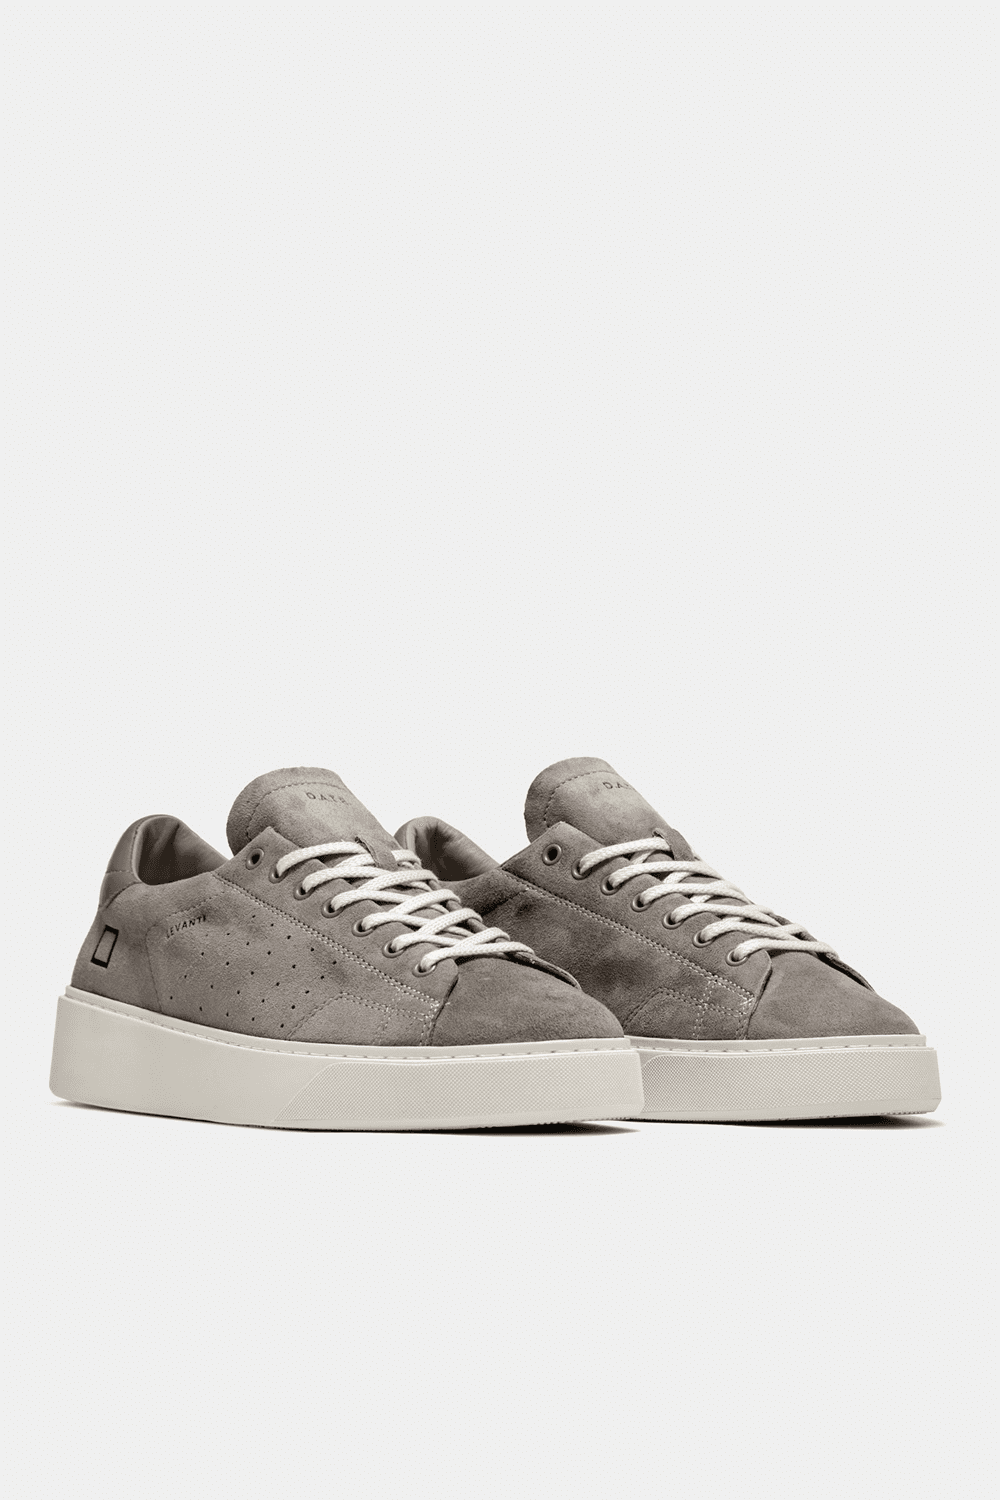 Buy the D.A.T.E. Levante River Sneaker in Taupe at Intro. Spend £50 for free UK delivery. Official stockists. We ship worldwide.